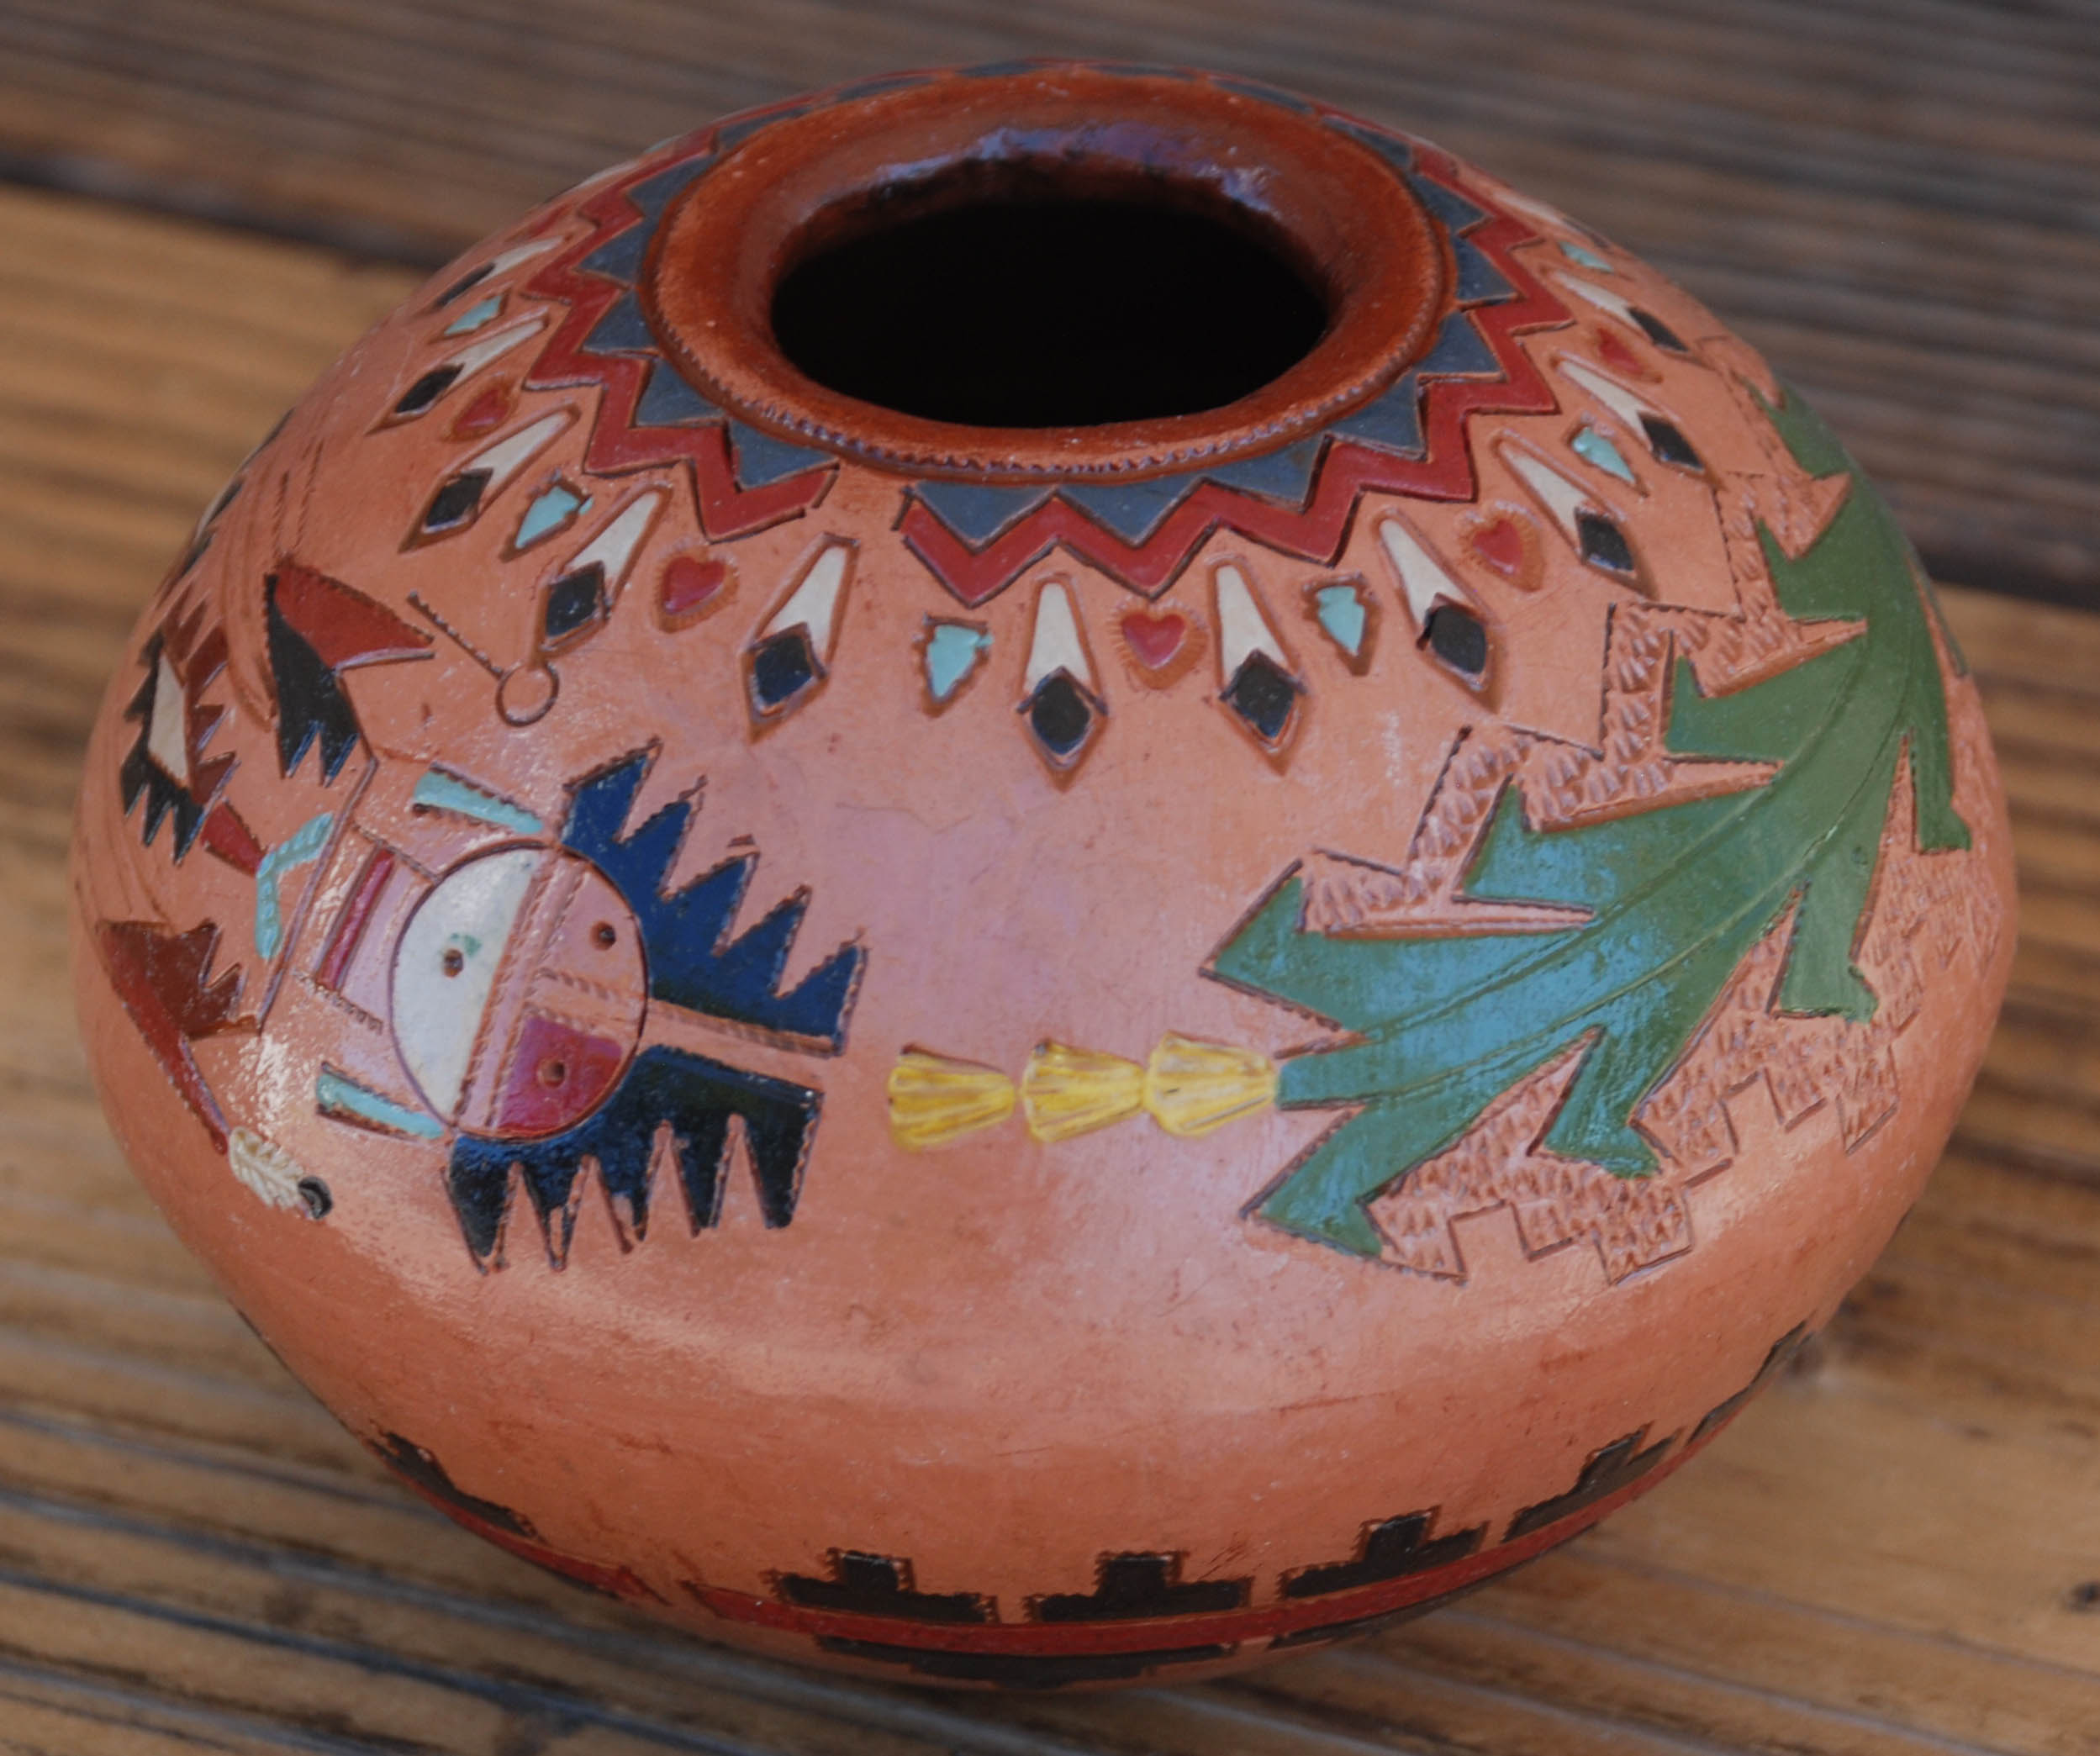 Irene and Ken White | Navajo Wedding Vase | Penfield Gallery of Indian Arts | Albuquerque, New Mexico